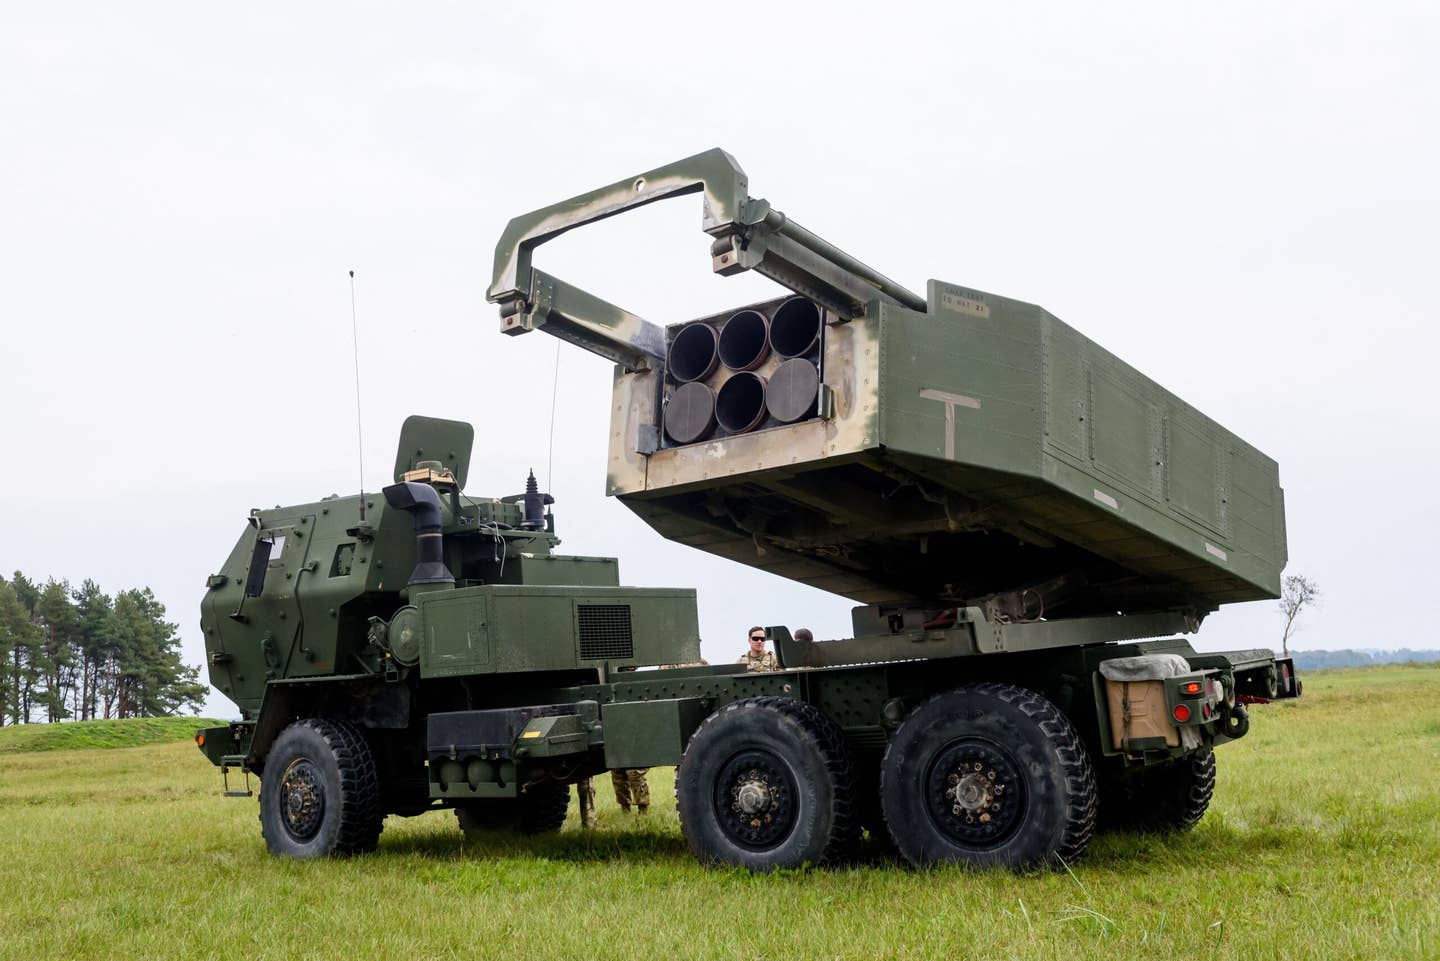 The Pentagon is looking into an advanced fire control system for HIMARS it has provided to Ukraine and will provide to Taiwan and Latvia. (Photo by GINTS IVUSKANS/AFP via Getty Images)